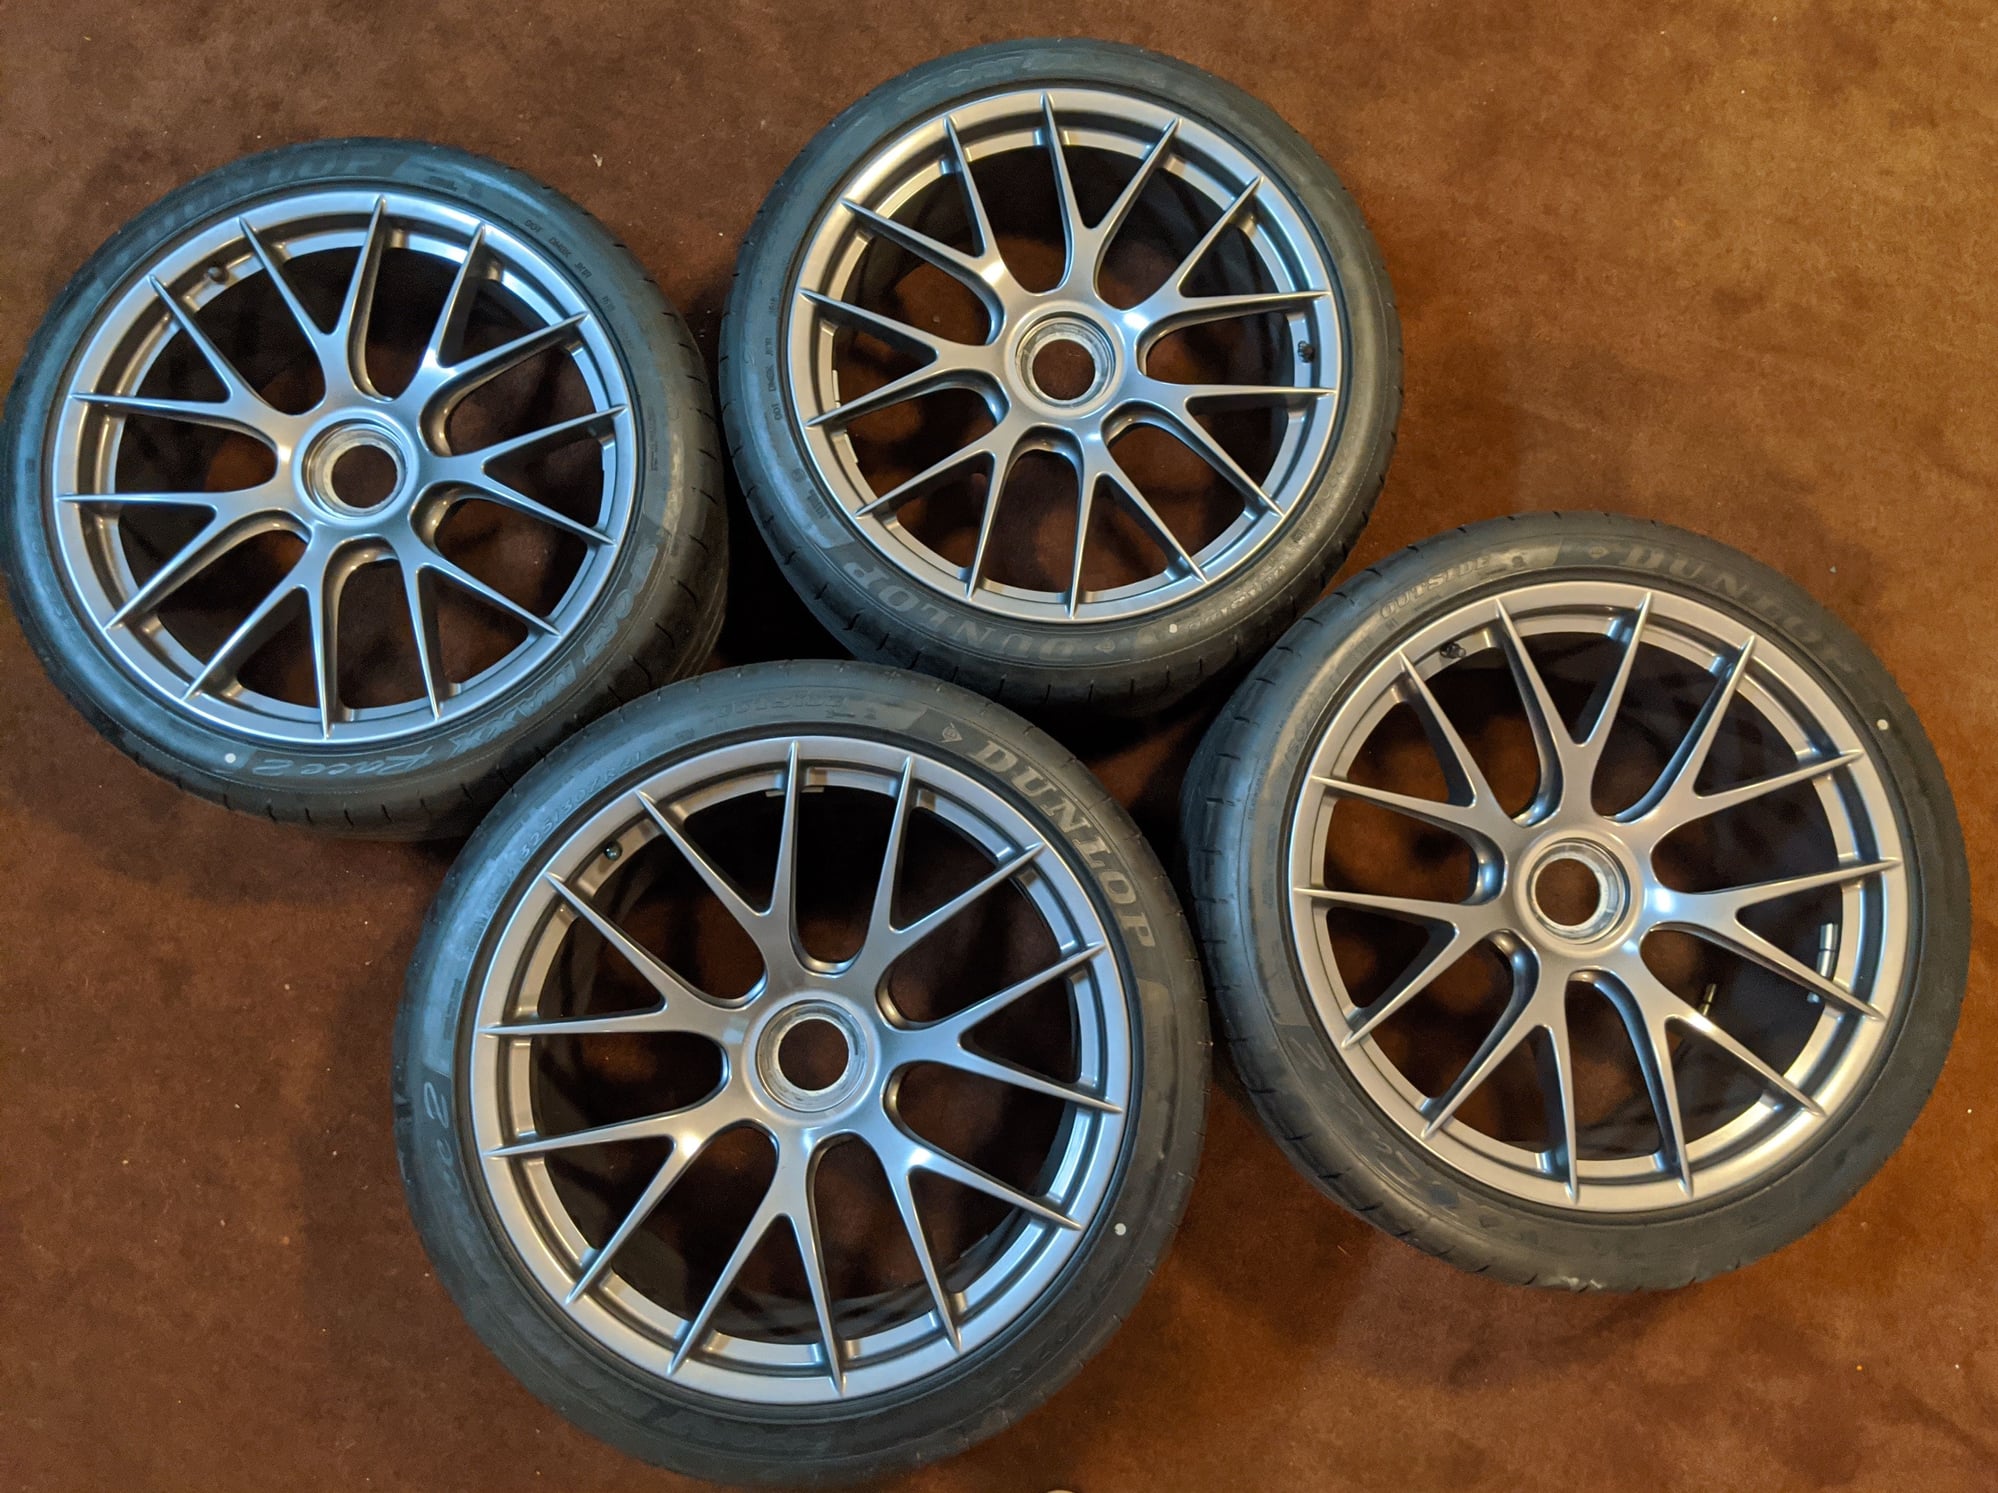 Wheels and Tires/Axles - BBS Magnesium Weissach Package Wheelset WP 991 GT3RS GT2RS - Used - 2018 to 2019 Porsche GT2 - 2016 to 2019 Porsche GT3 - 2014 to 2015 Porsche 918 Spyder - Boston, MA 02215, United States